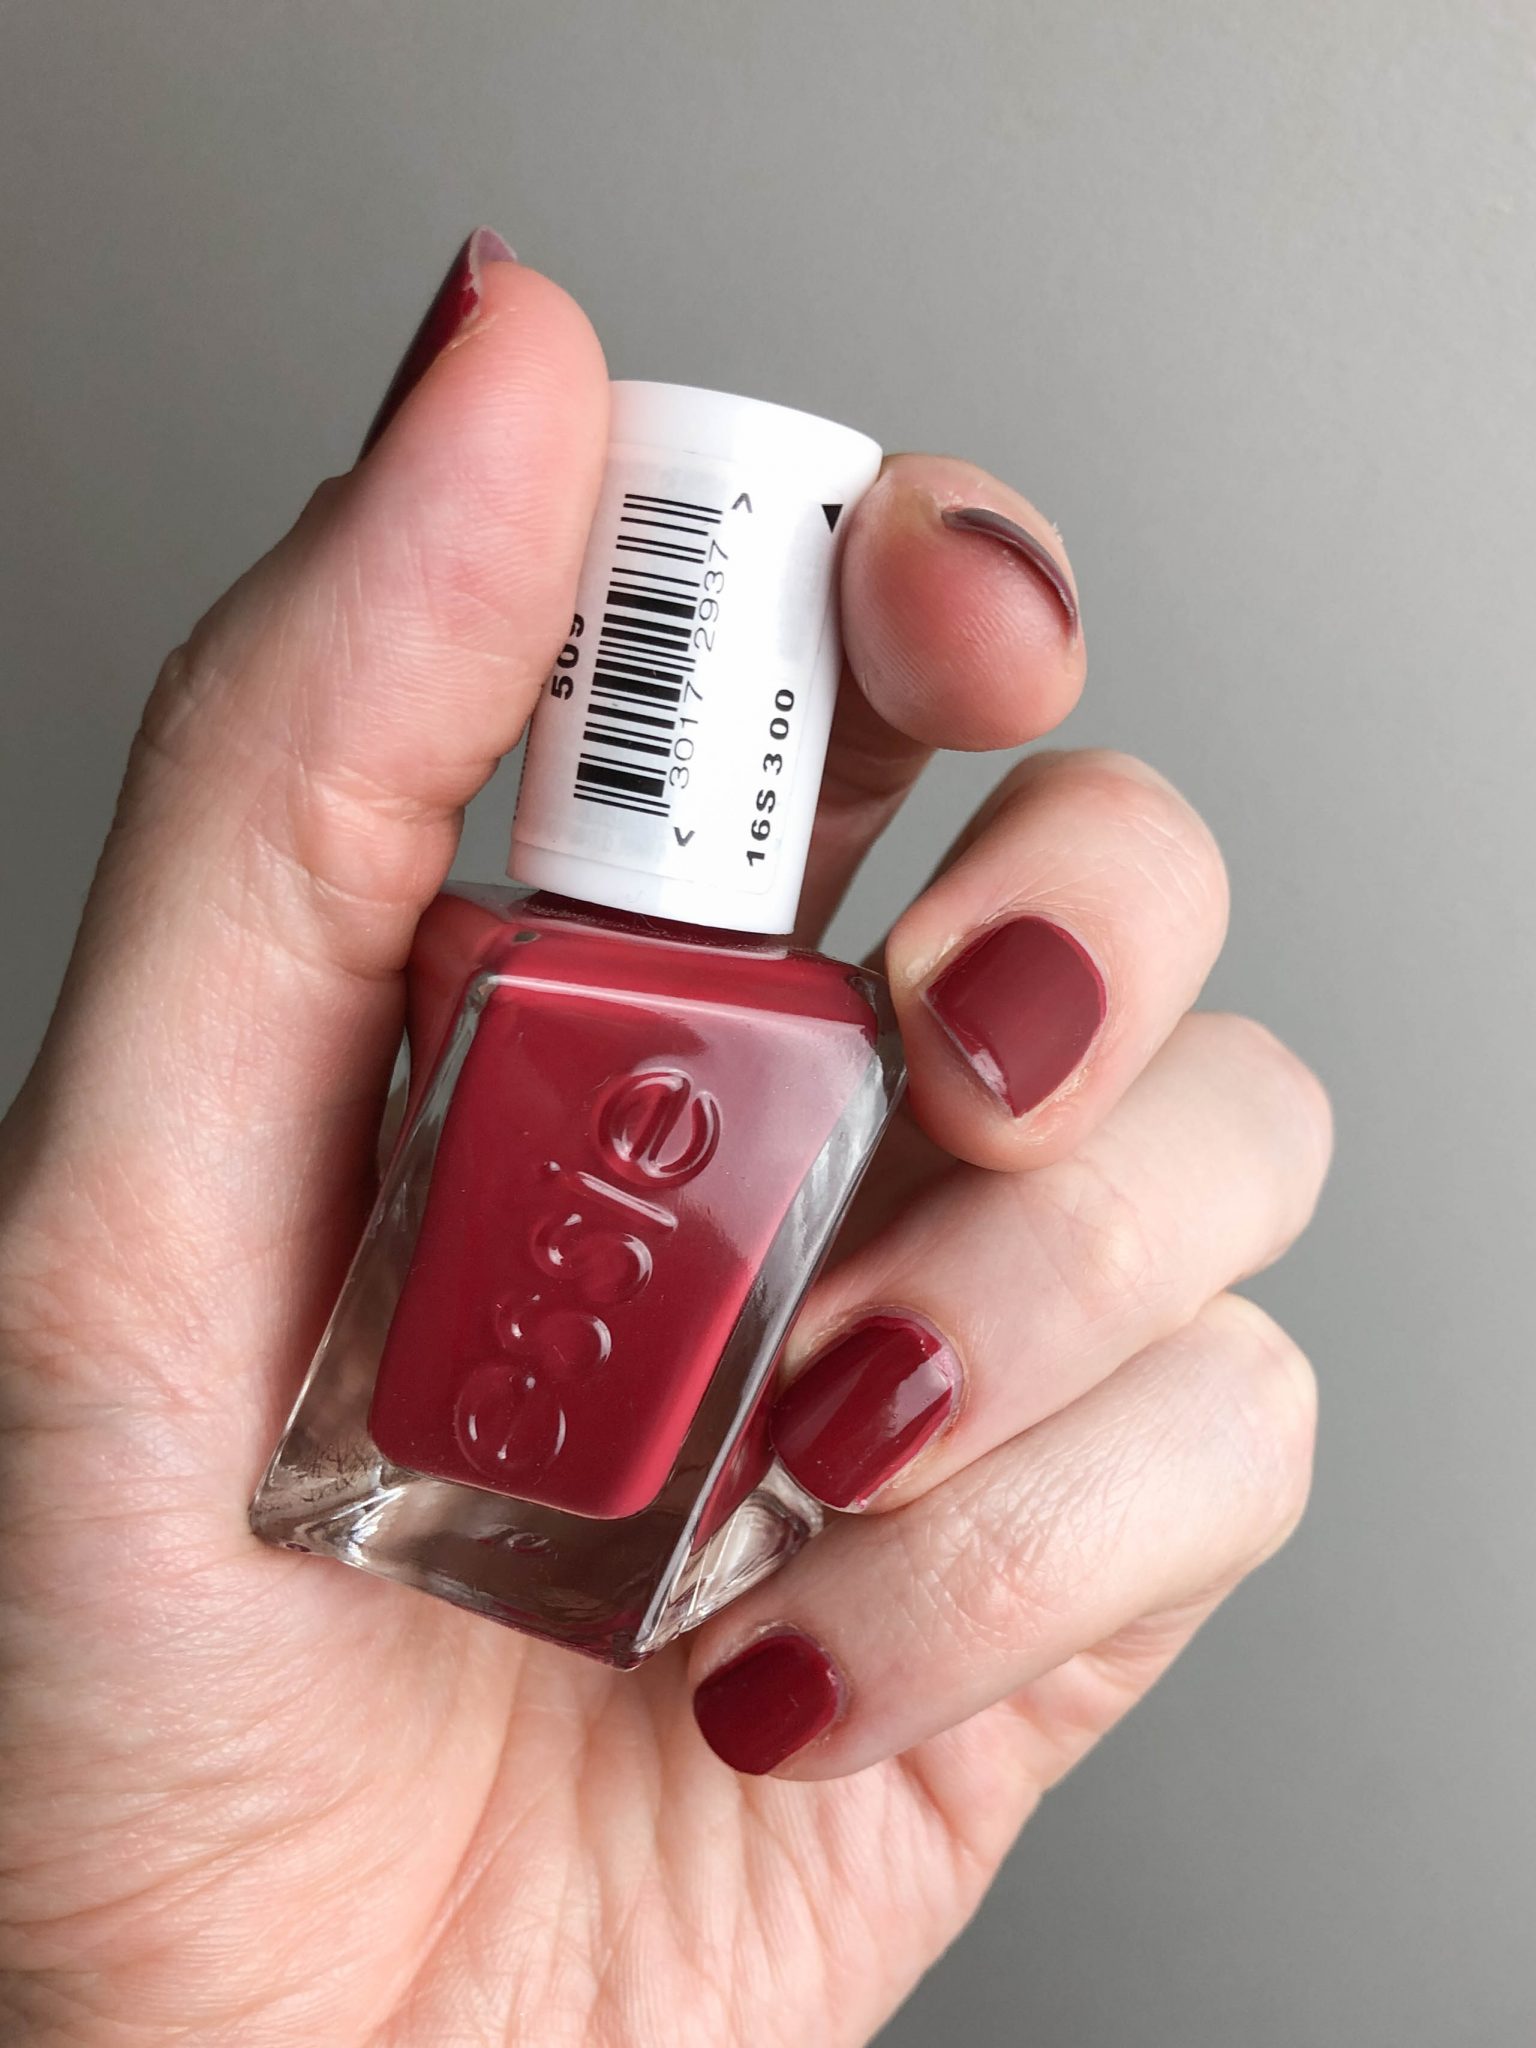 Couture Nytt favoritlack: Beauty - Daisy Paint the Gel Red Essie Gown från